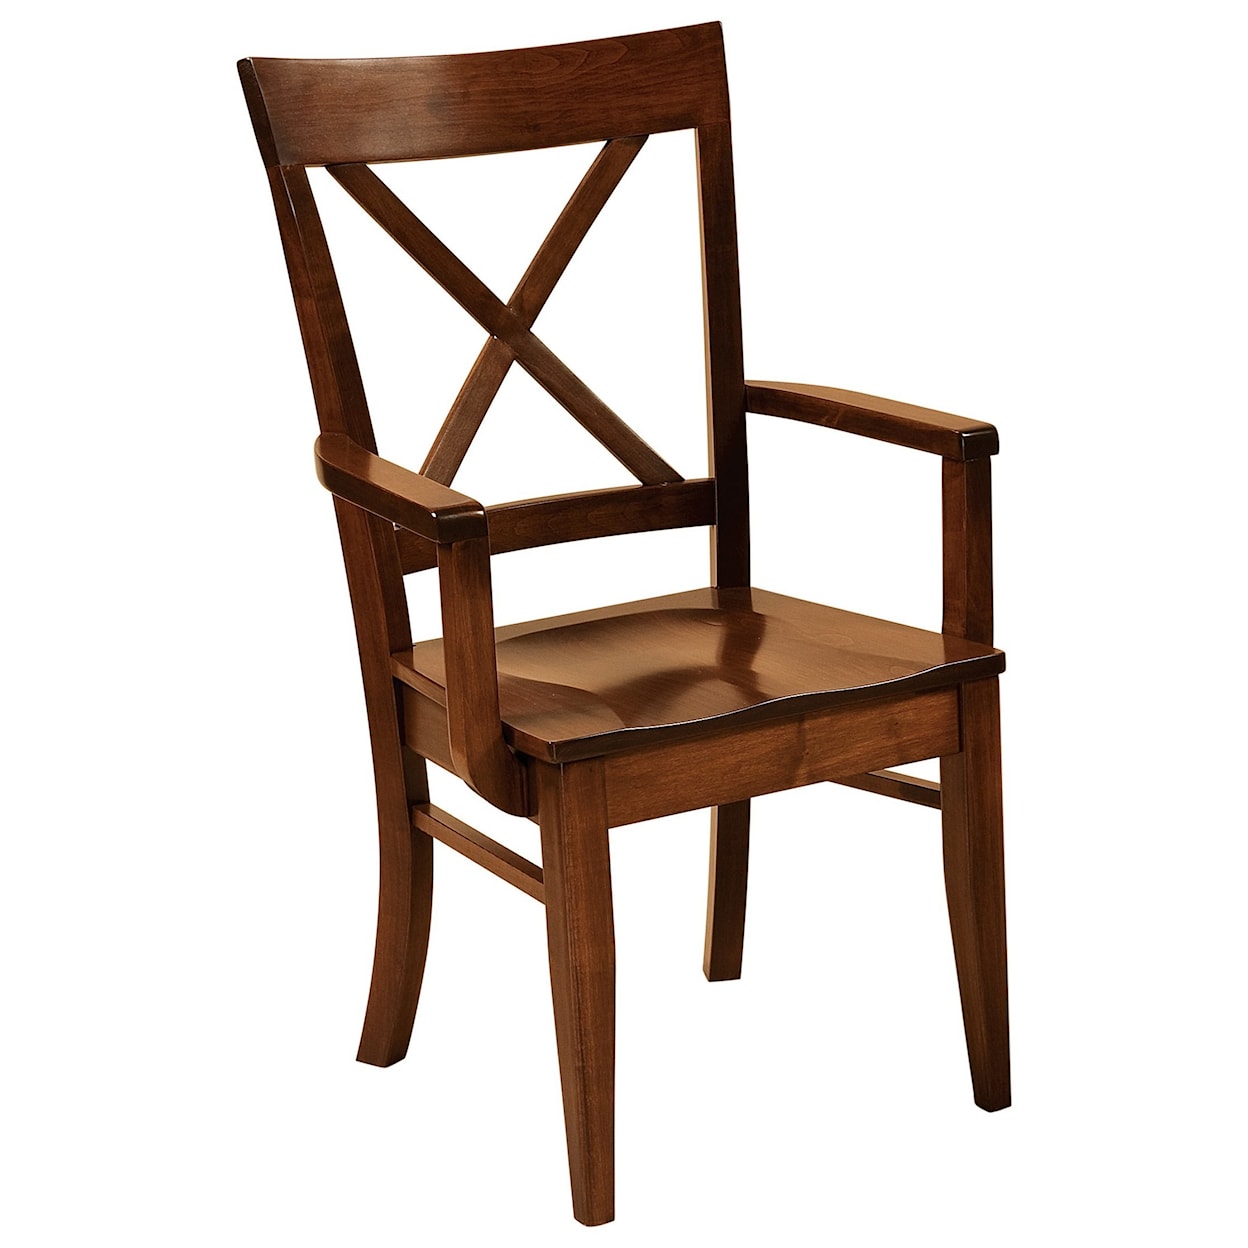 F&N Woodworking Frontier Arm Chair - Wood Seat